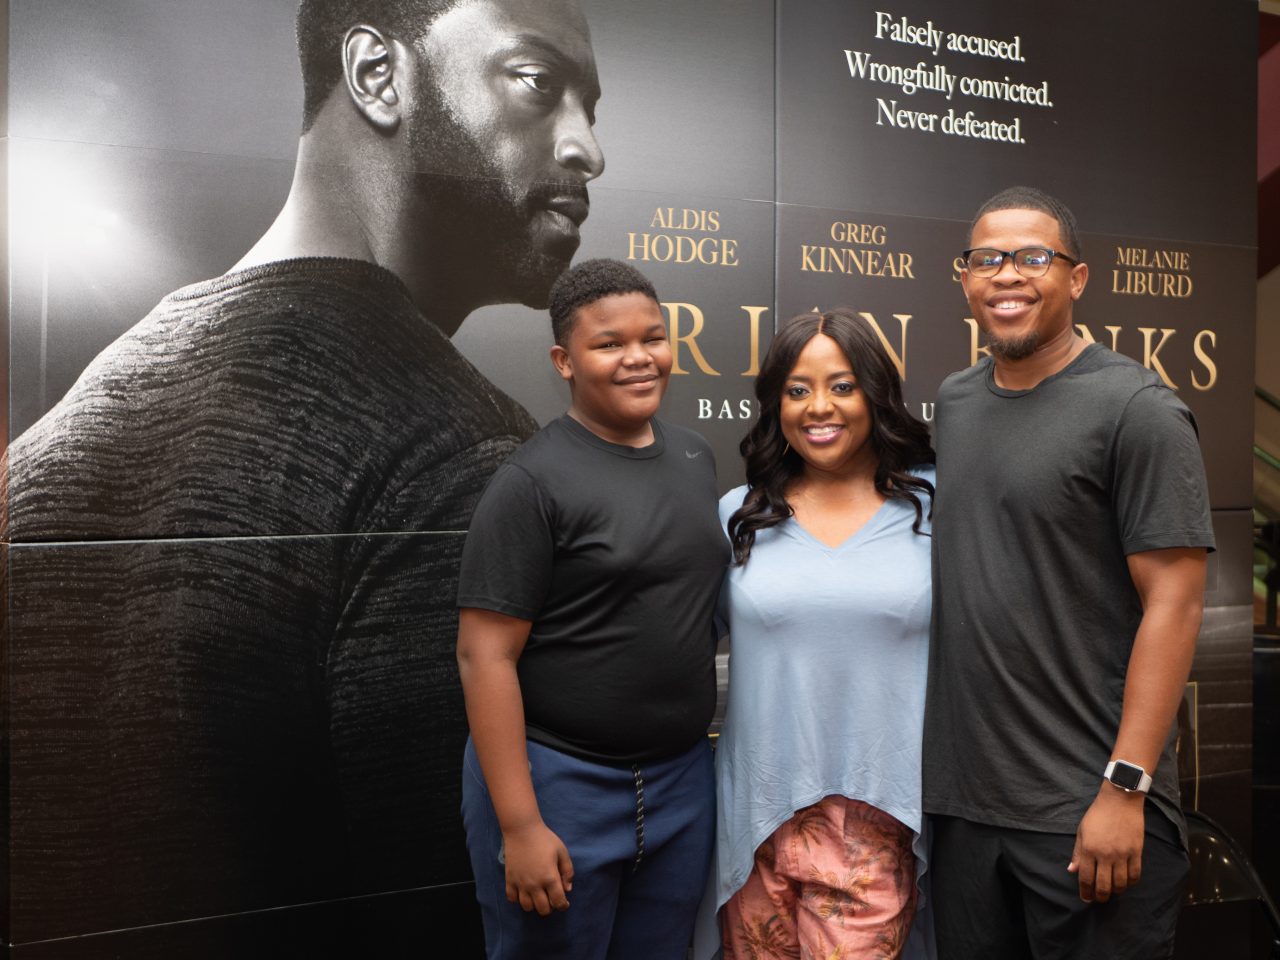 Brian Banks Movie Event Hosted By Sherri Shepherd (Photo Credit: PICTURE PERFECT PHOTOGRAPHY)